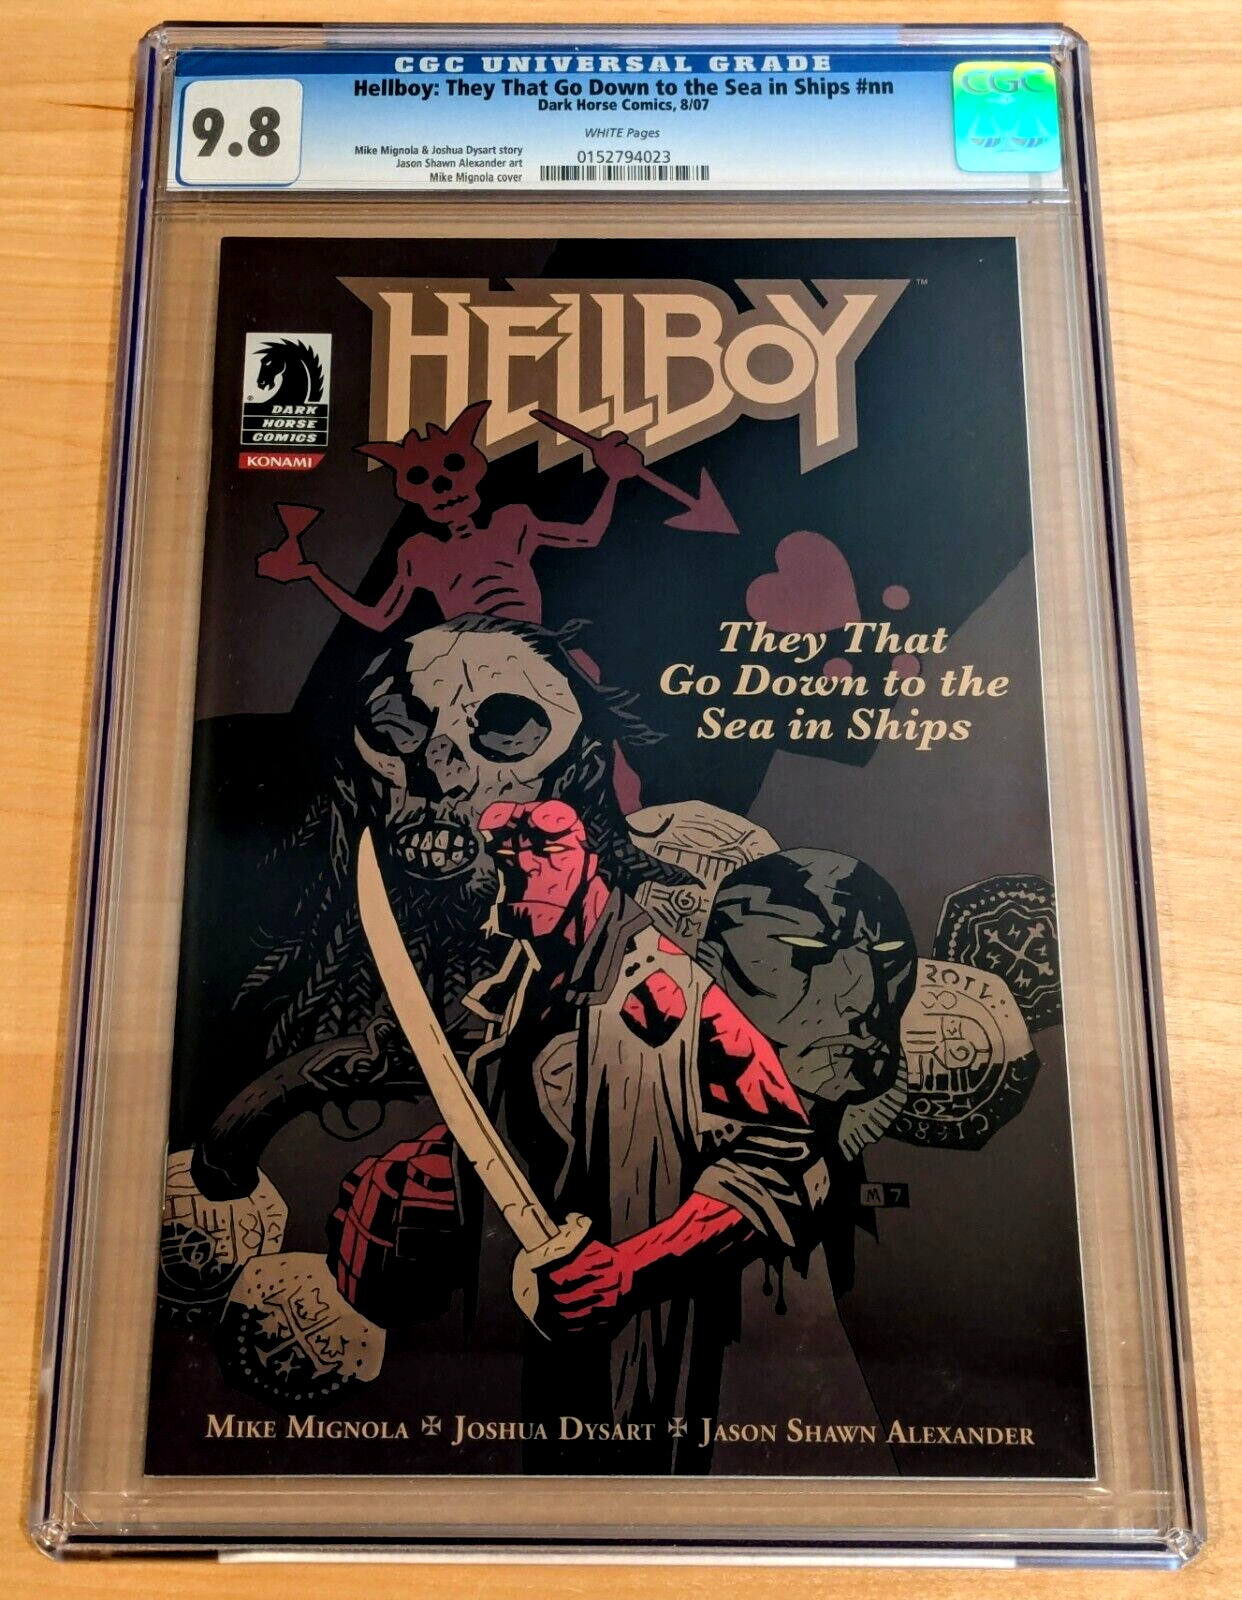 HELLBOY THEY THAT GO DOWN TO THE SEA IN SHIPS CGC 9.8 2007 NYCC KONAMI VARIANT